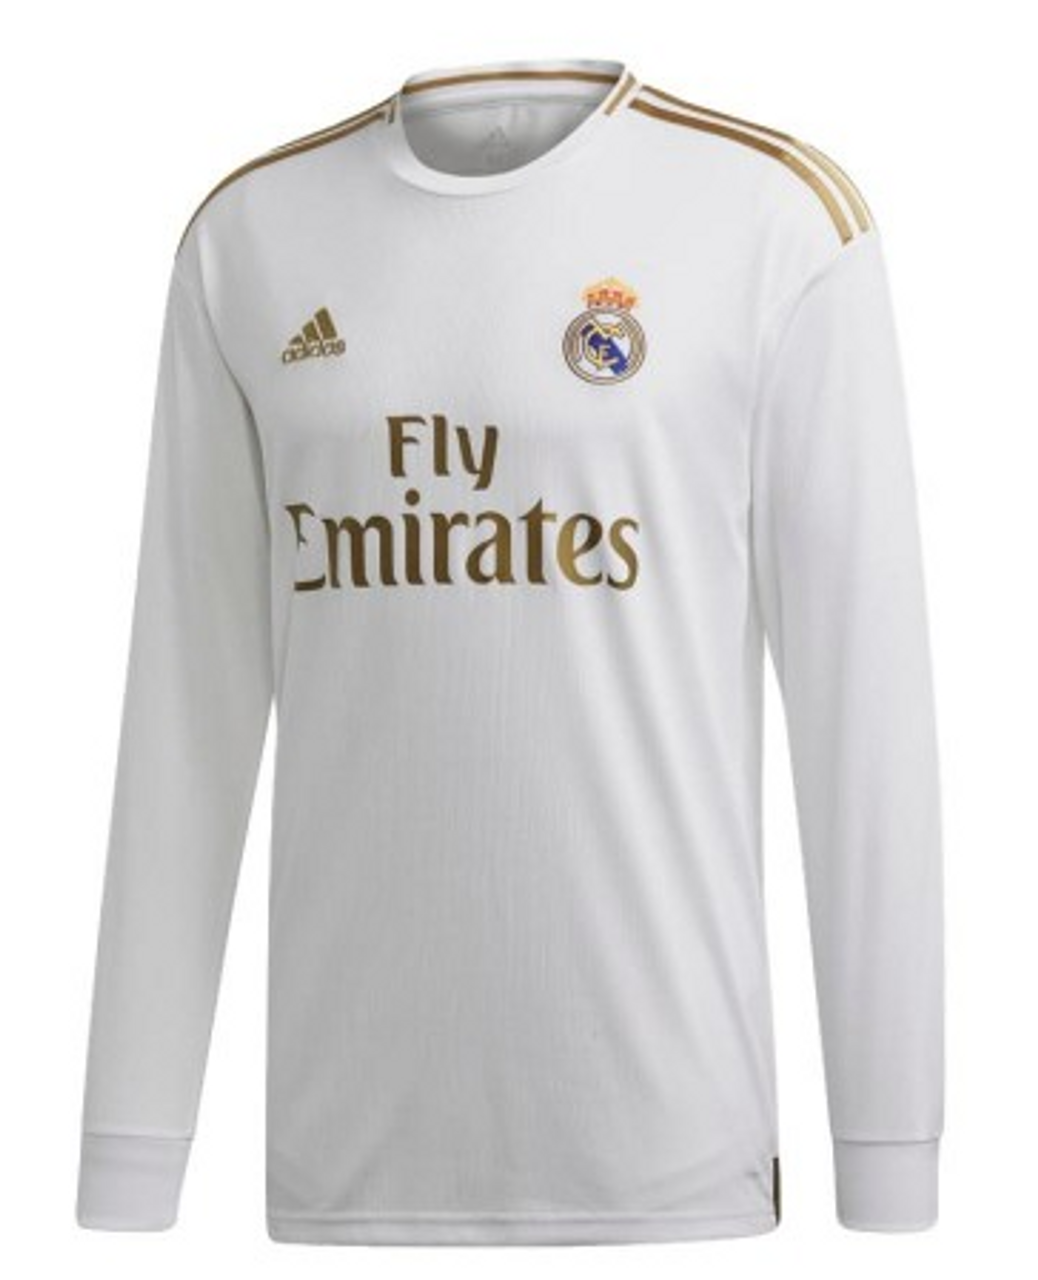 fly emirates white and gold jersey